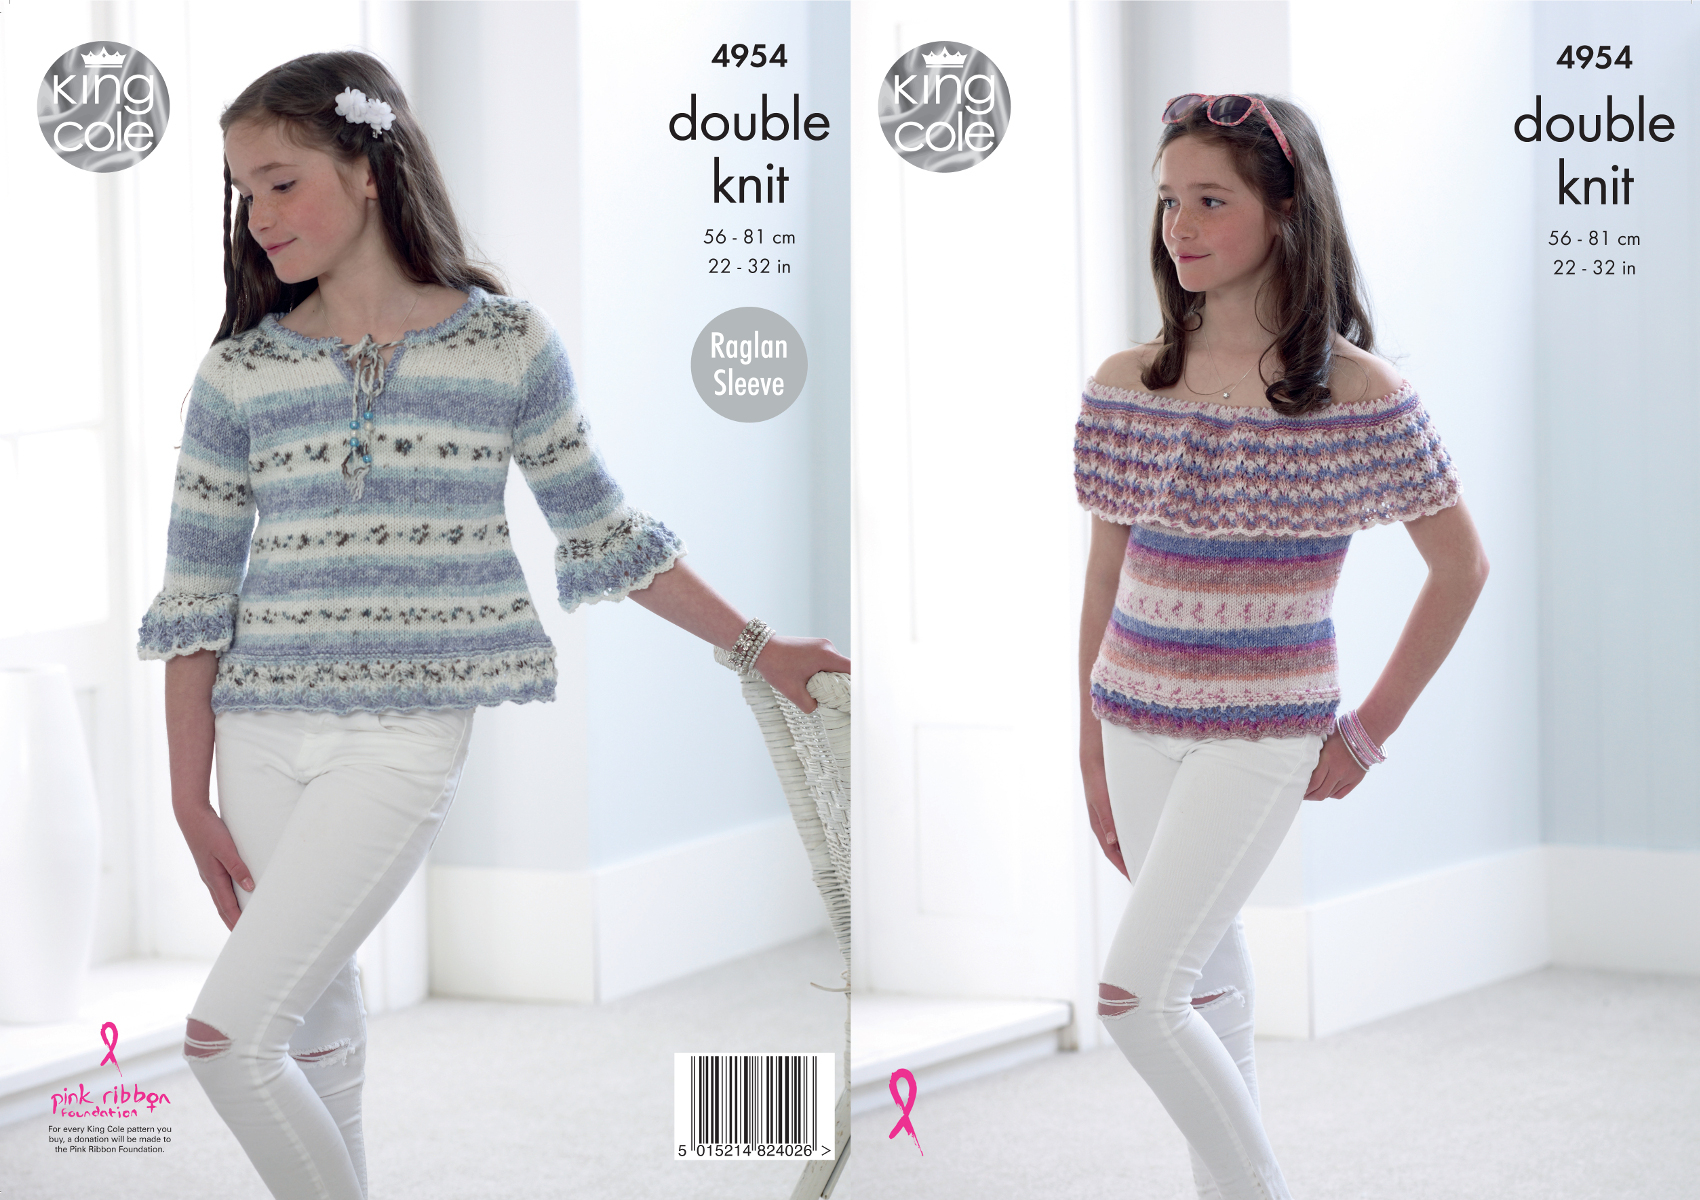 Off The Shoulder Sweater Knitting Pattern Details About Girls Double Knitting Pattern King Cole Off Shoulder Top Raglan Sweater 4954